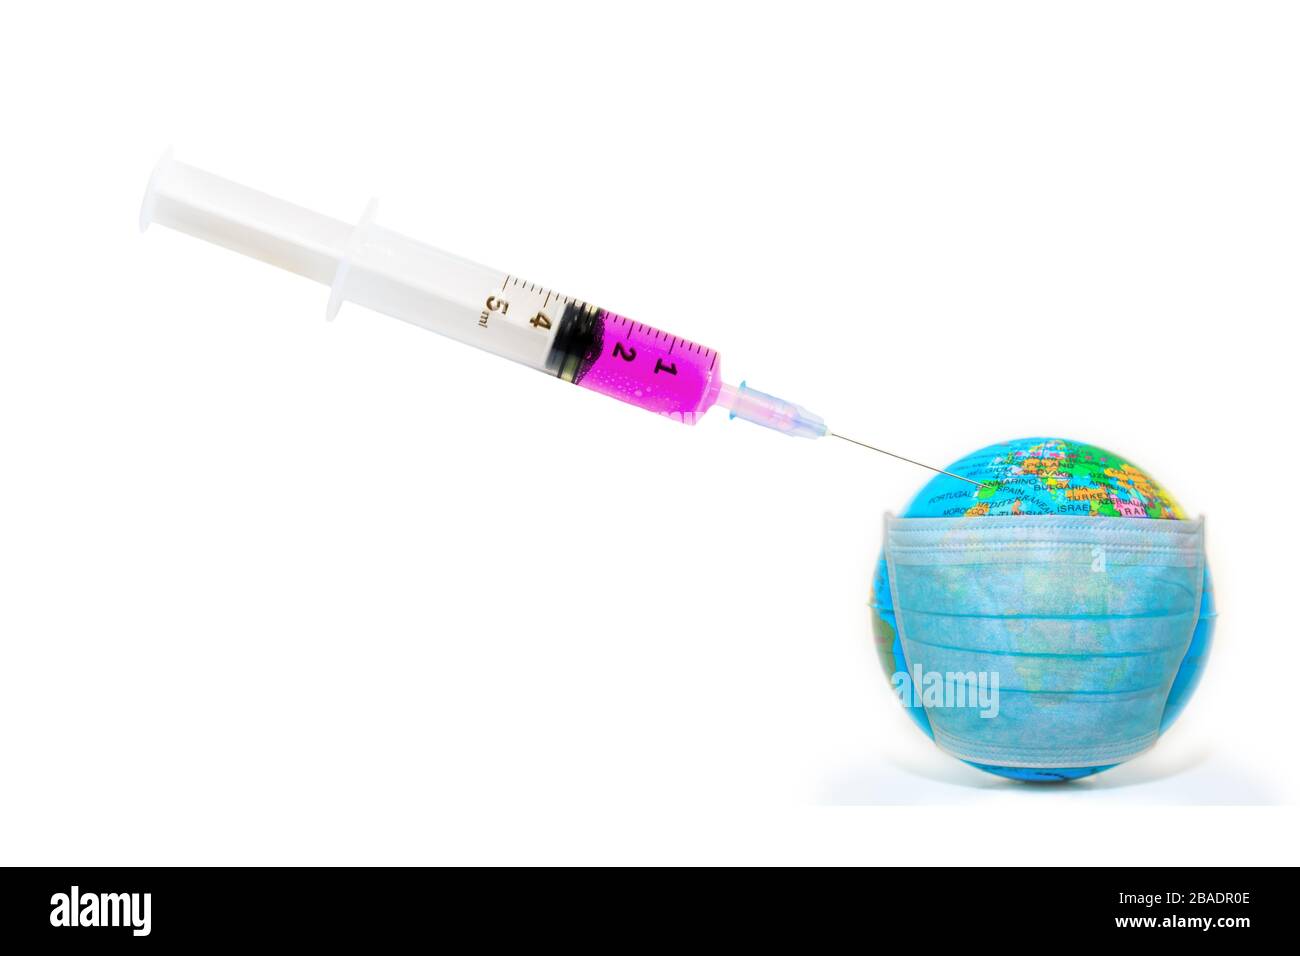 Image of a syringe with vaccine and face mask on a sick world globe isolated on white background. Epidemic flu and pandemic emergency worldwide for Stock Photo